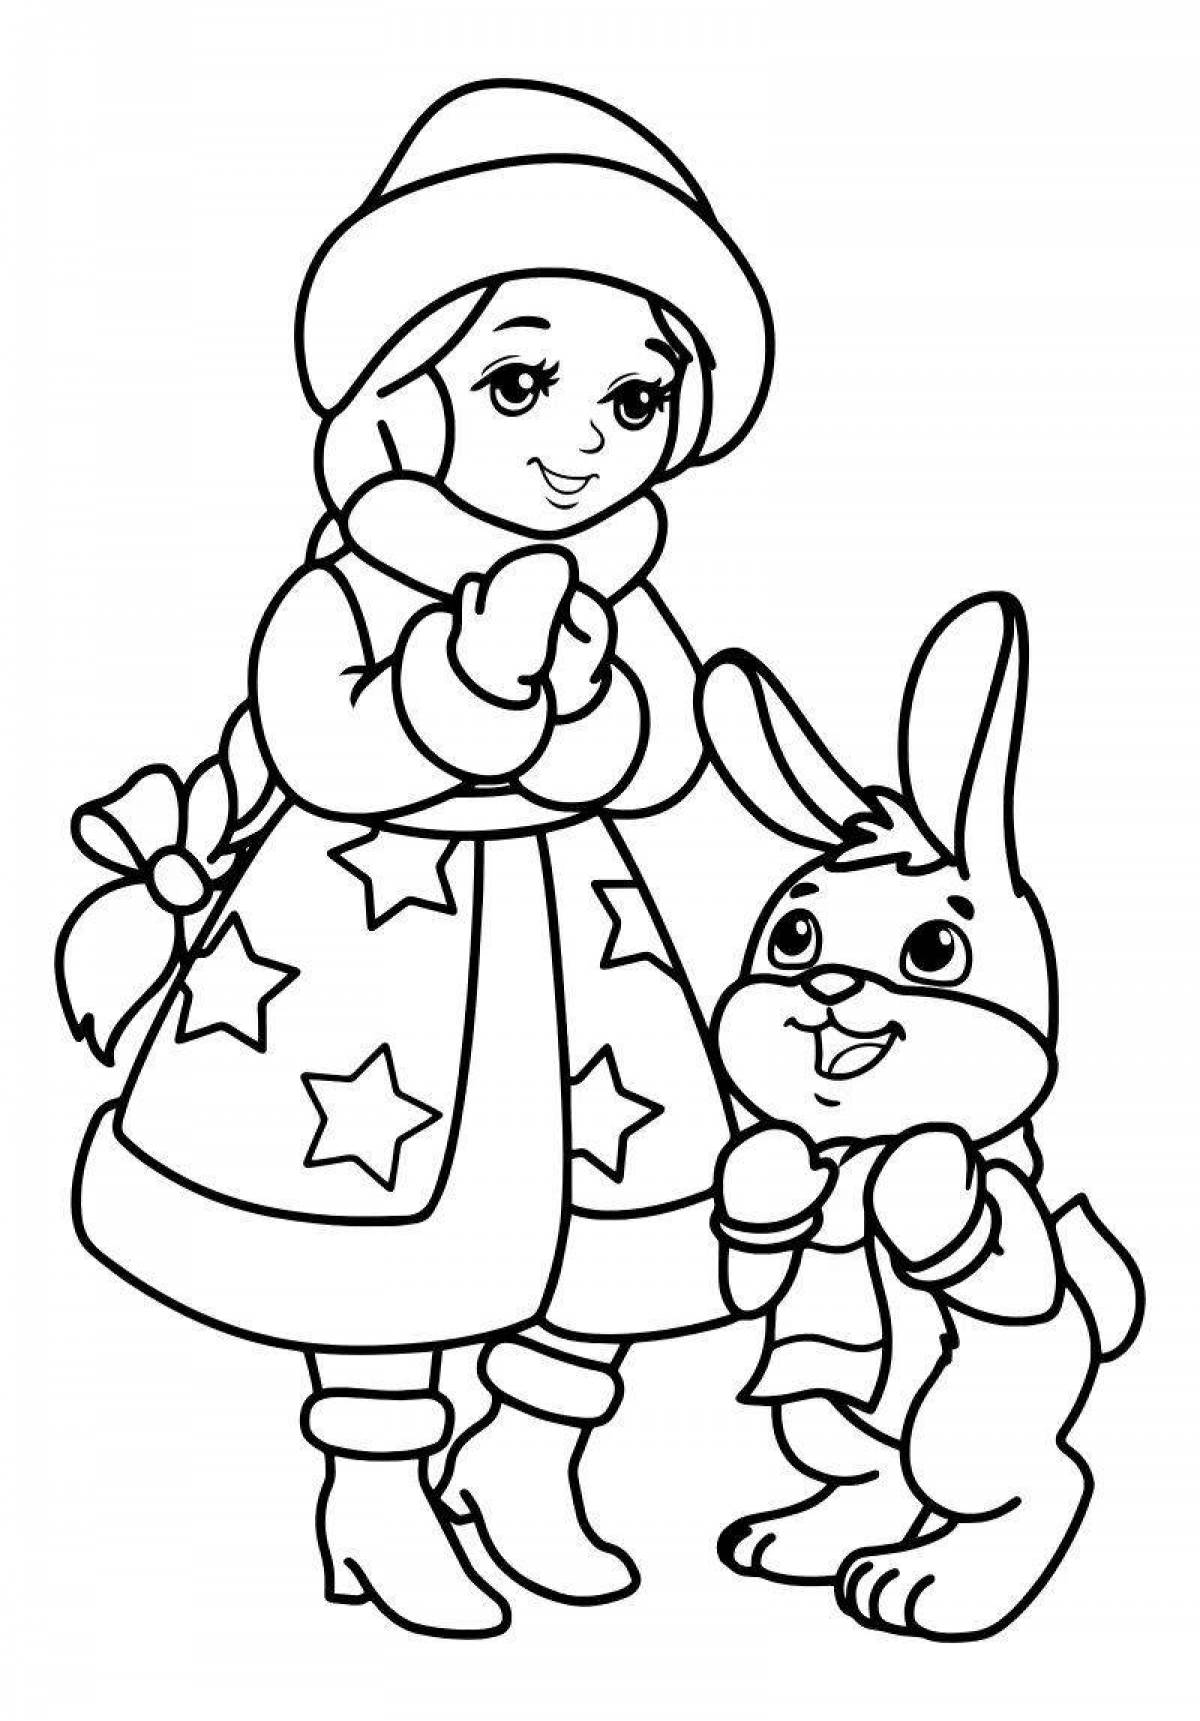 Funny bunny coloring book with a gift